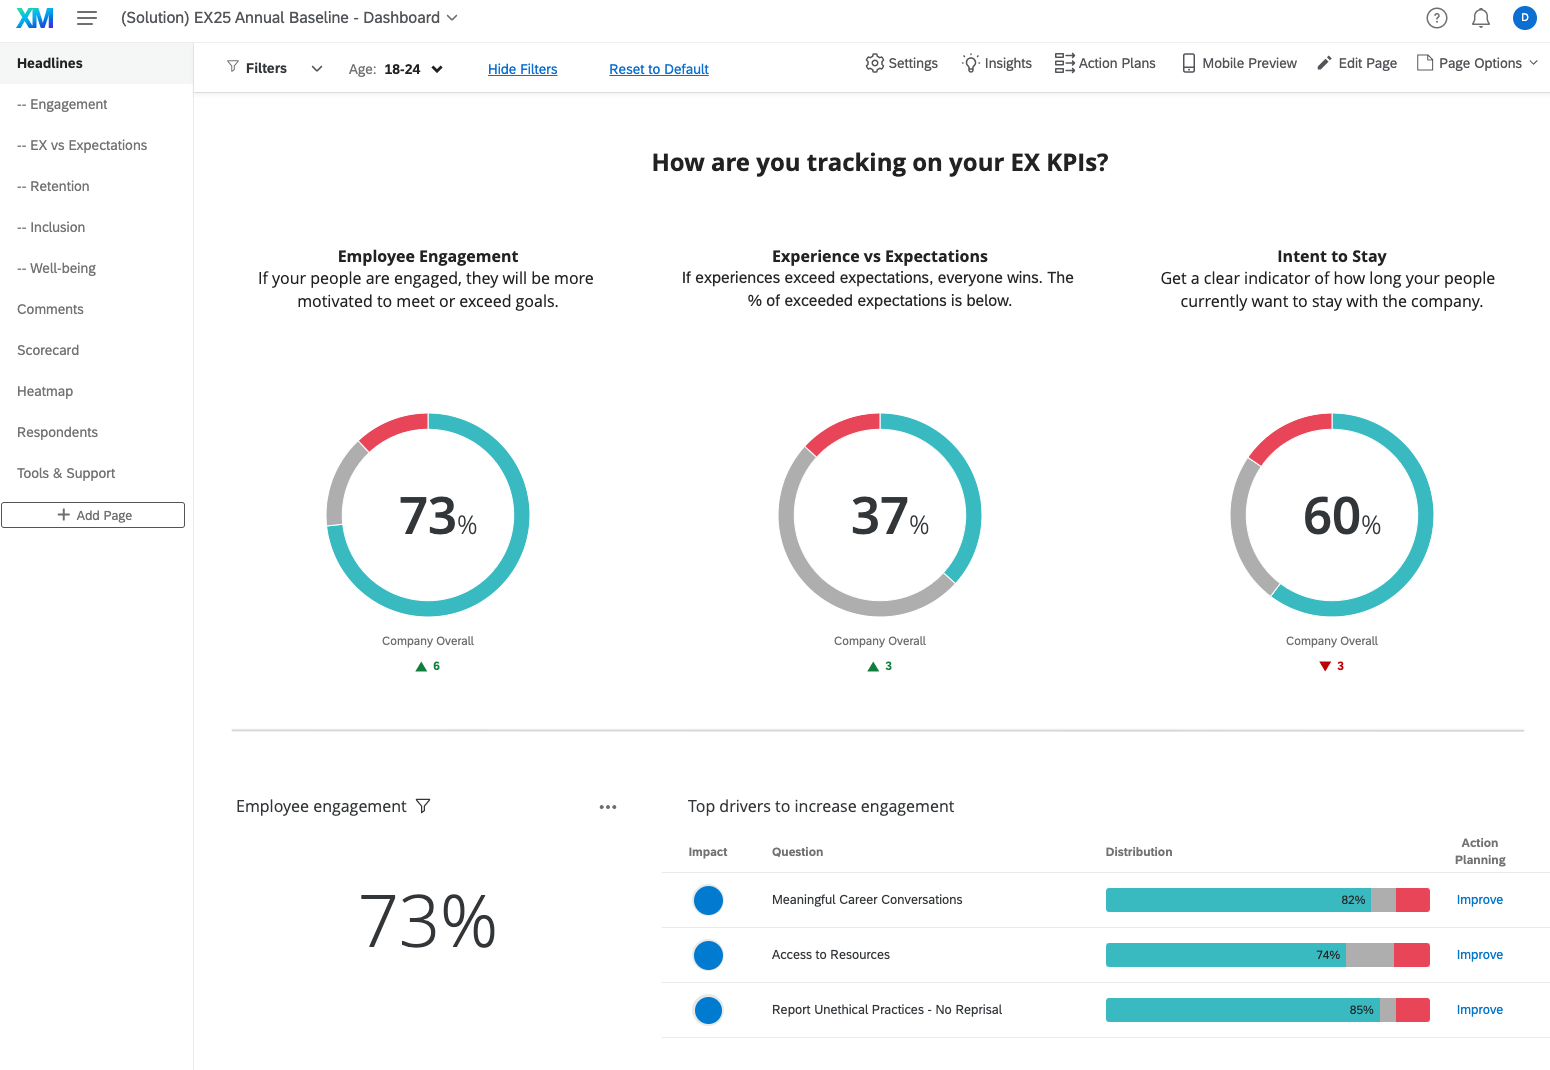 A dashboard in Qualtrics EmployeeXM gives a high-level summary of employee engagement